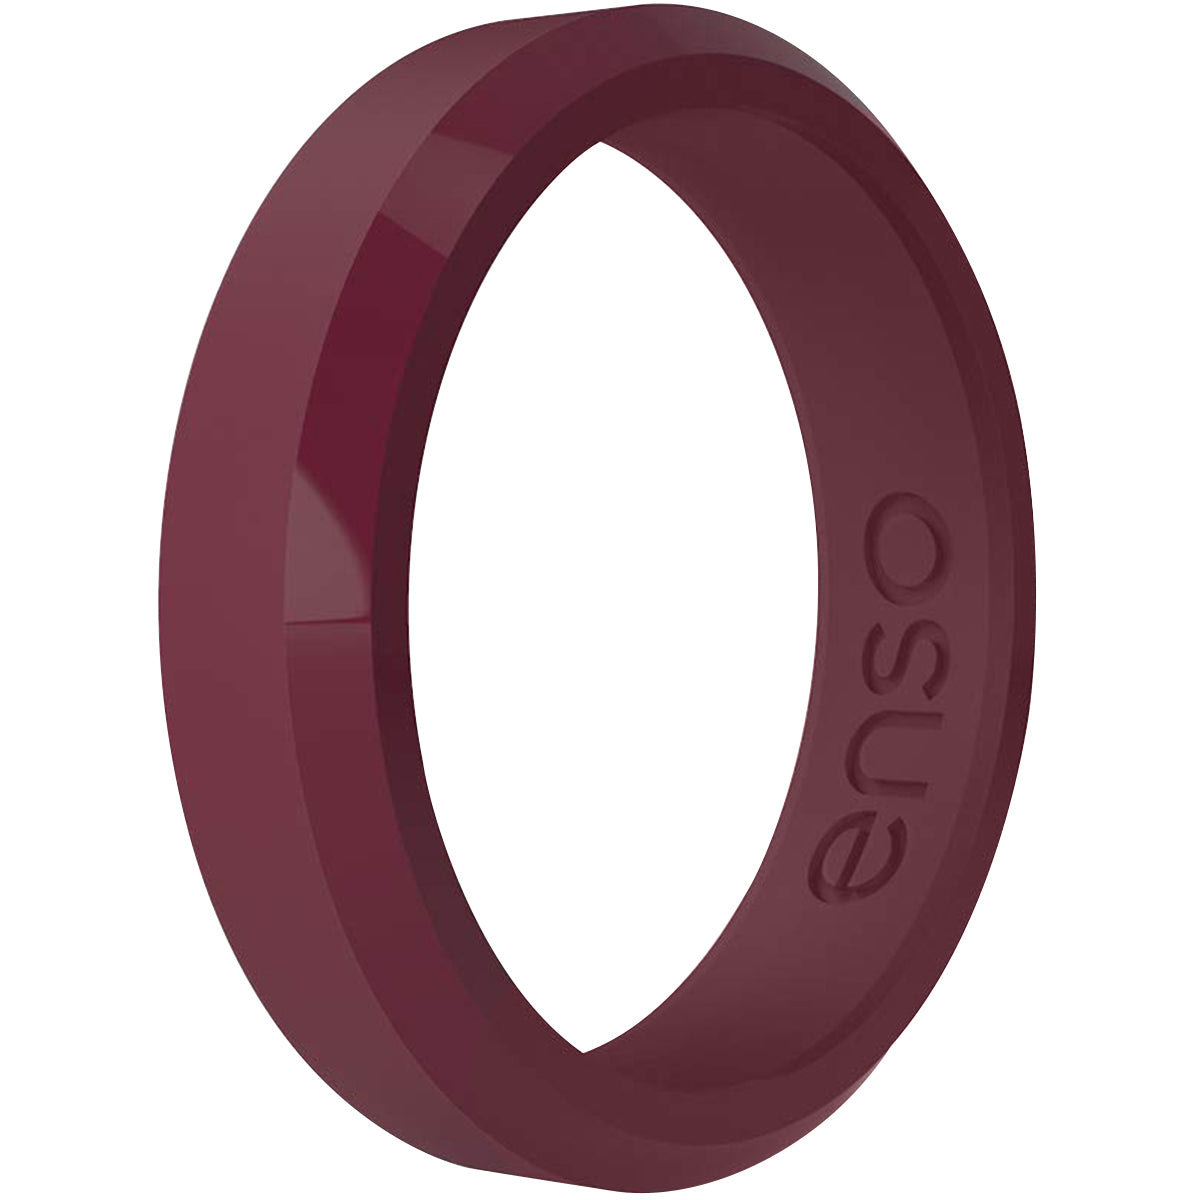 Enso Rings Thin Bevel Series Silicone Ring - Oxblood Enso Rings